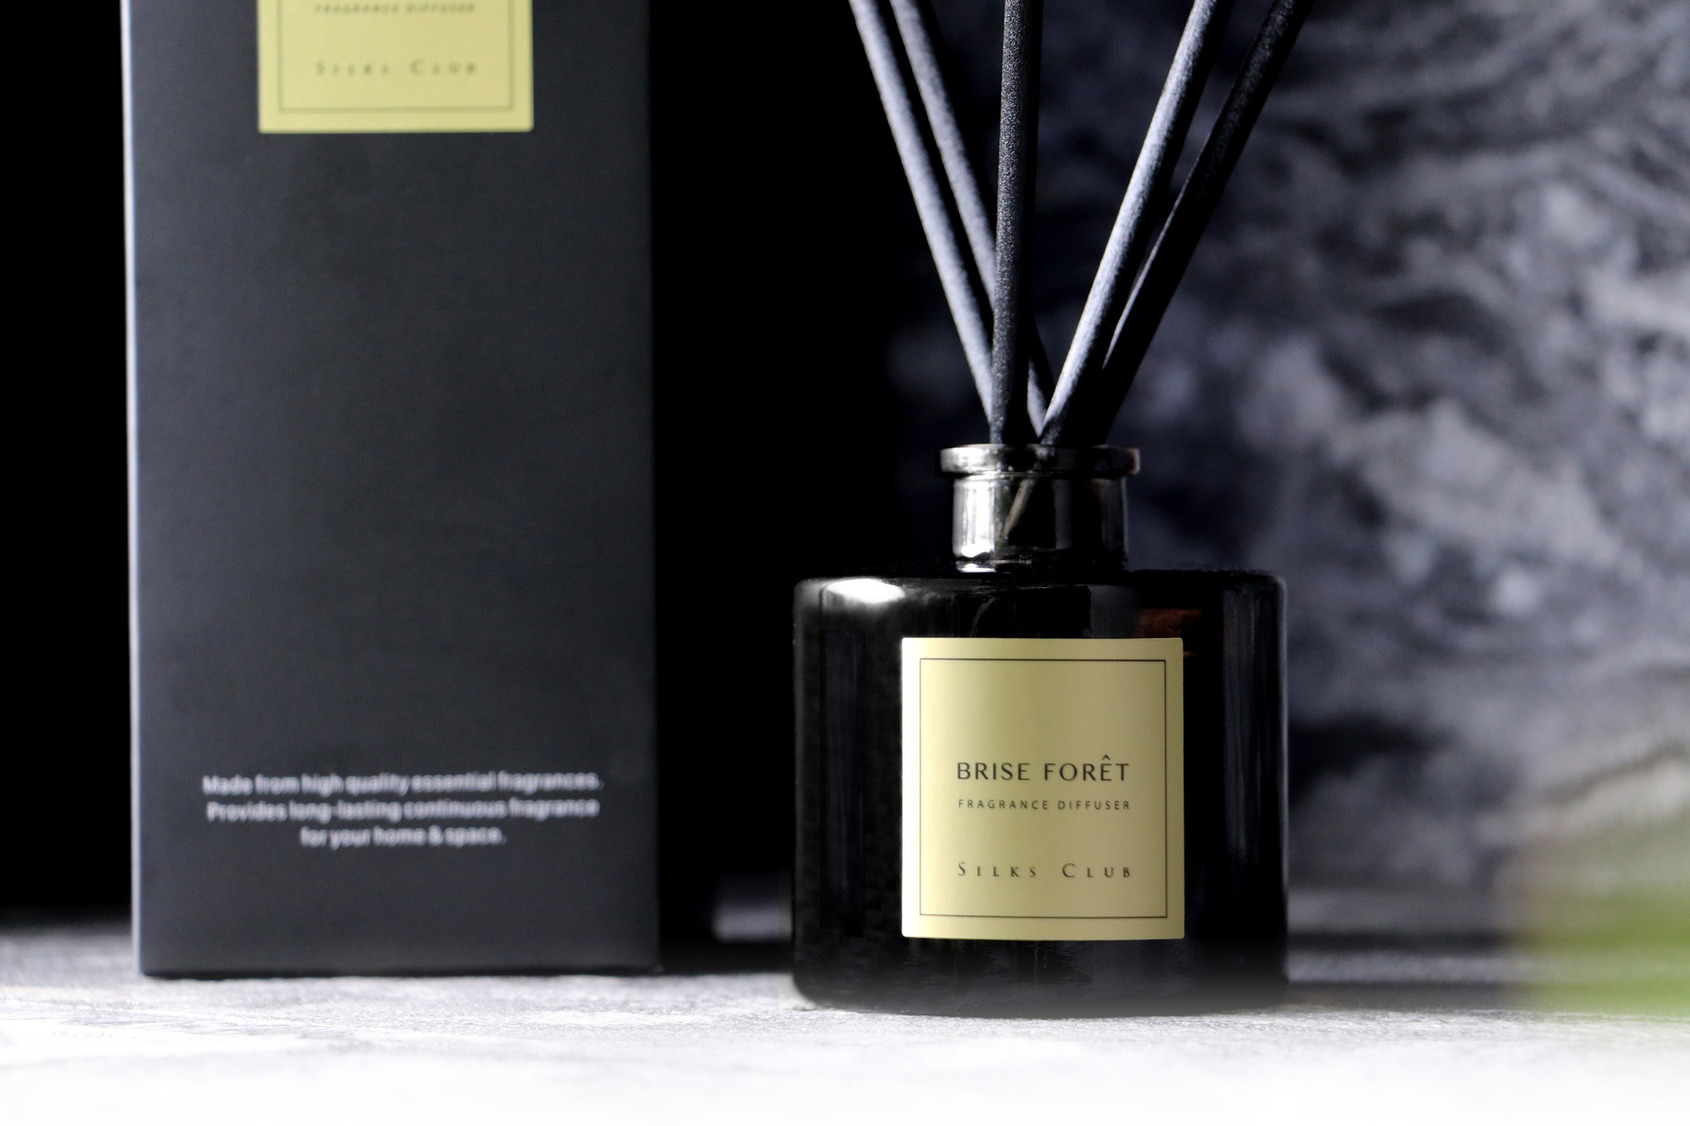 The Scent #111, and BRISE FORÊT © Coutesy of the SILKS CLUB 